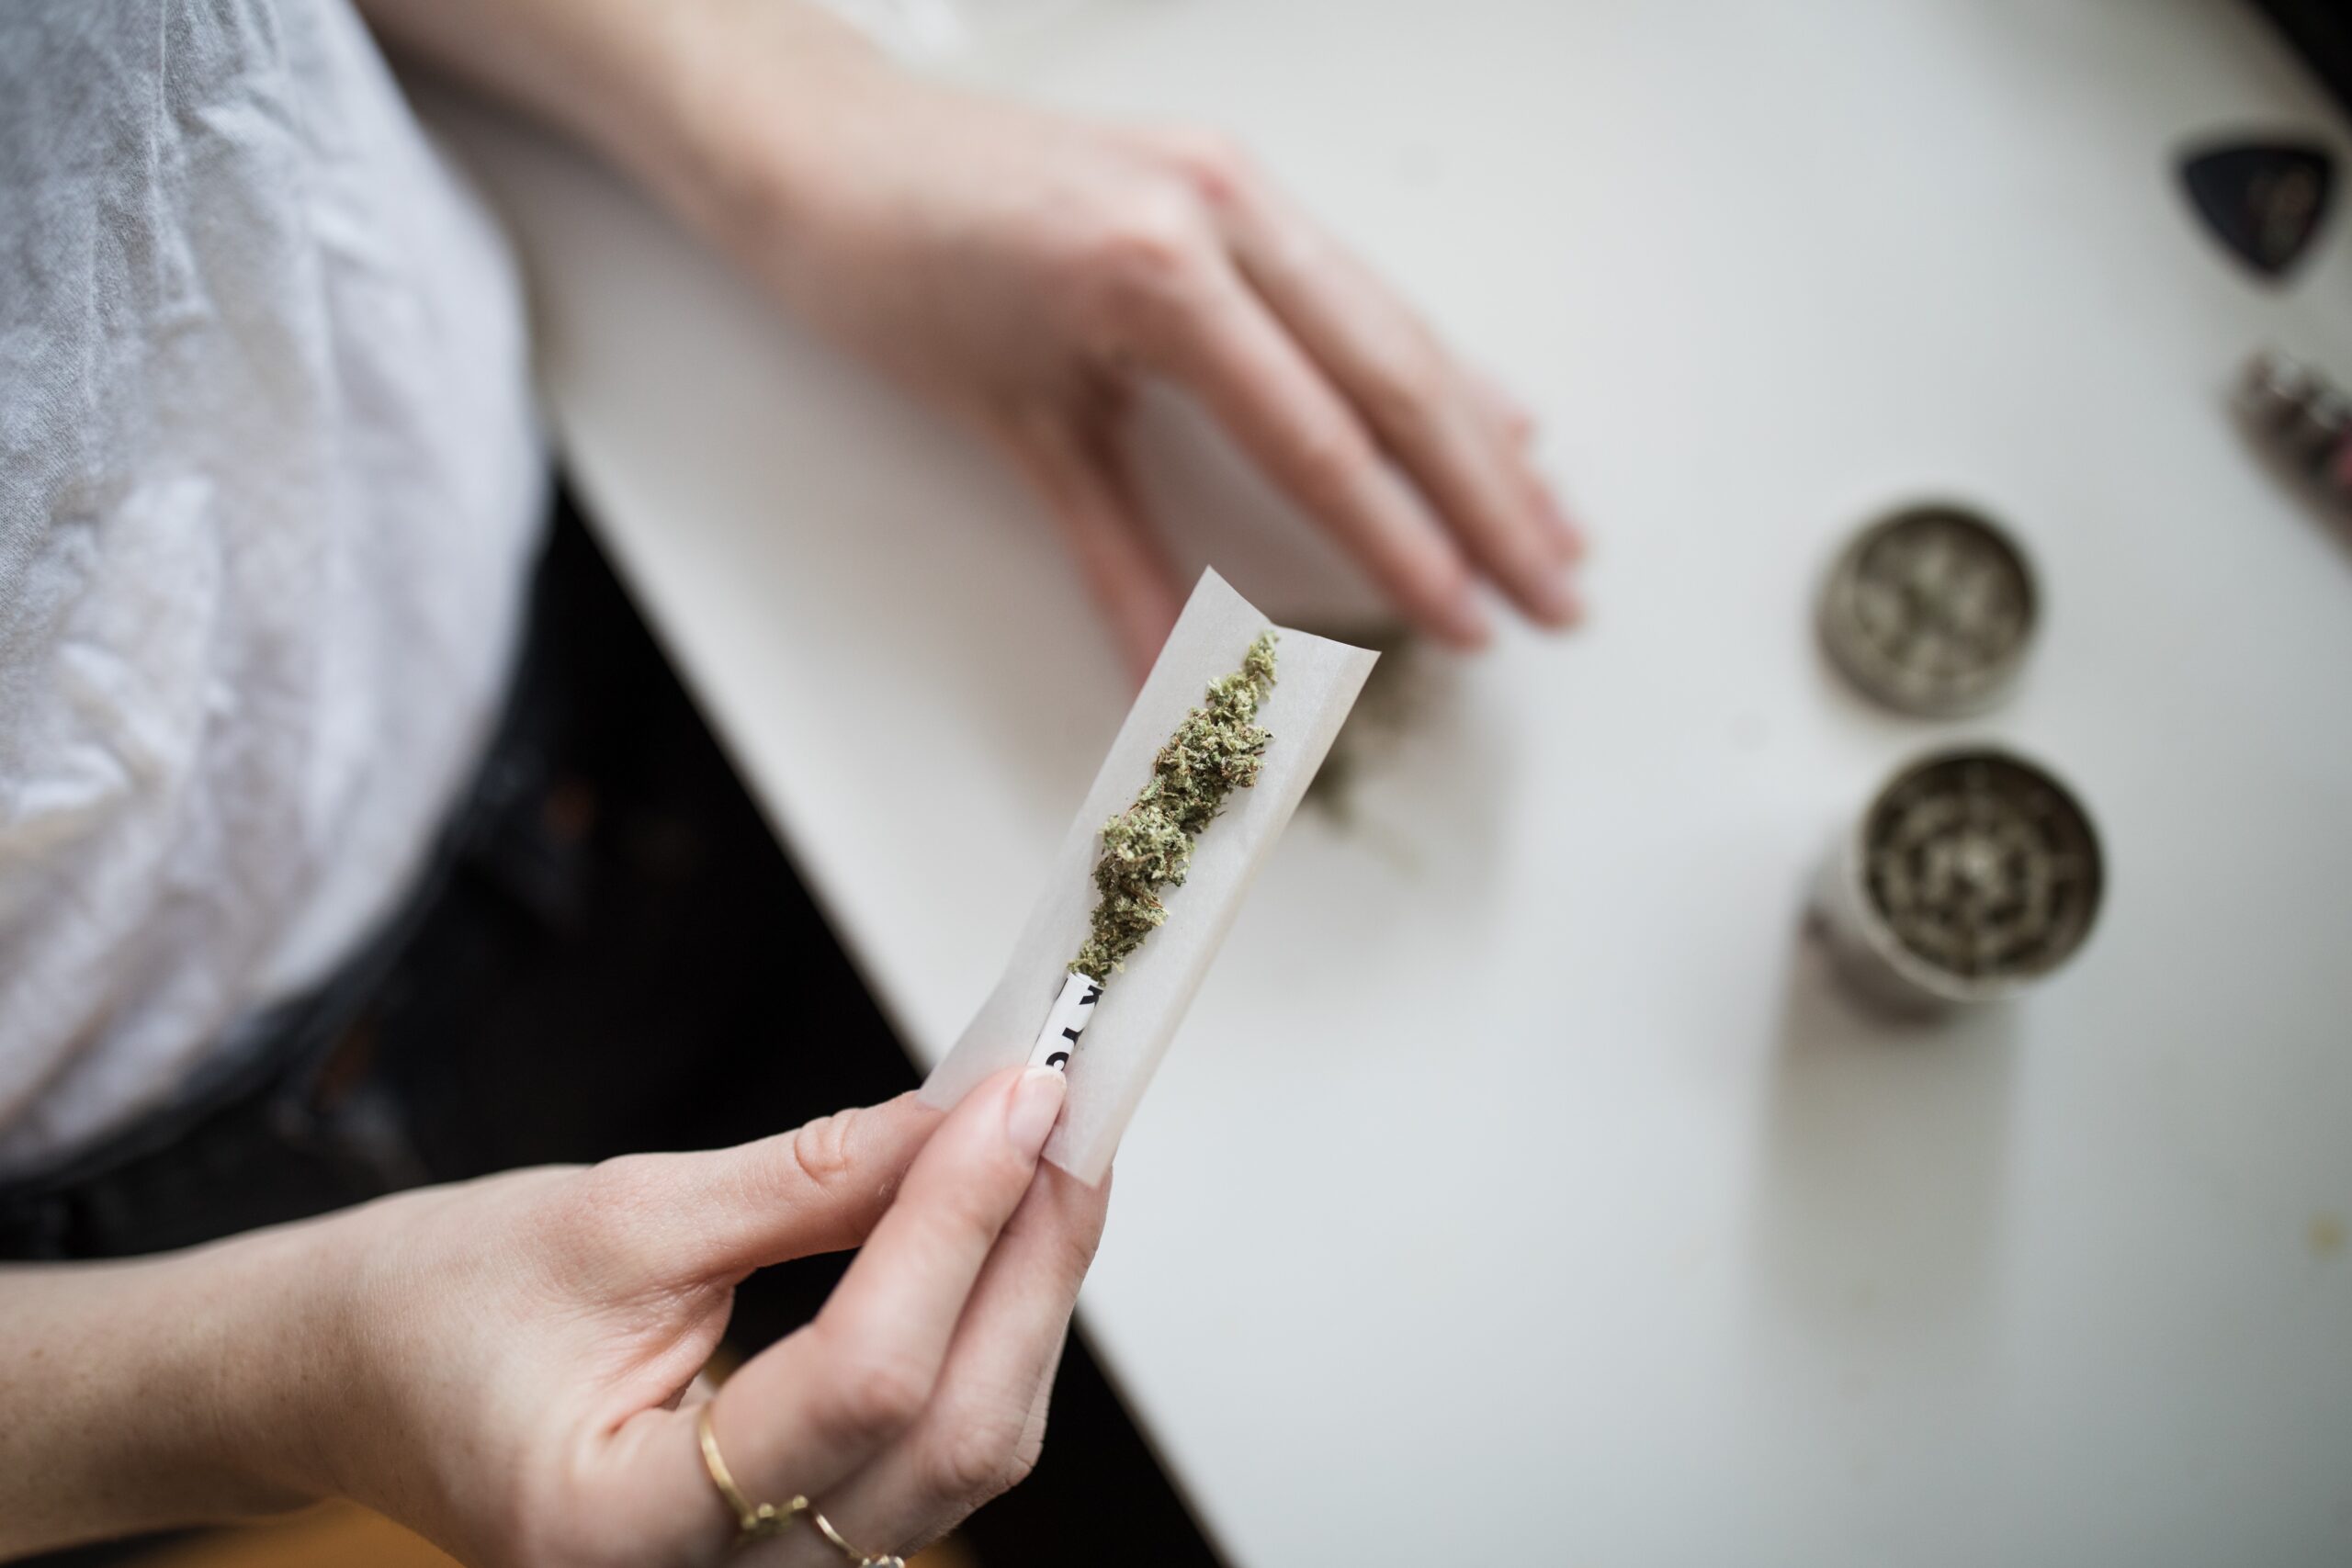 A person rolling a cannabis joint